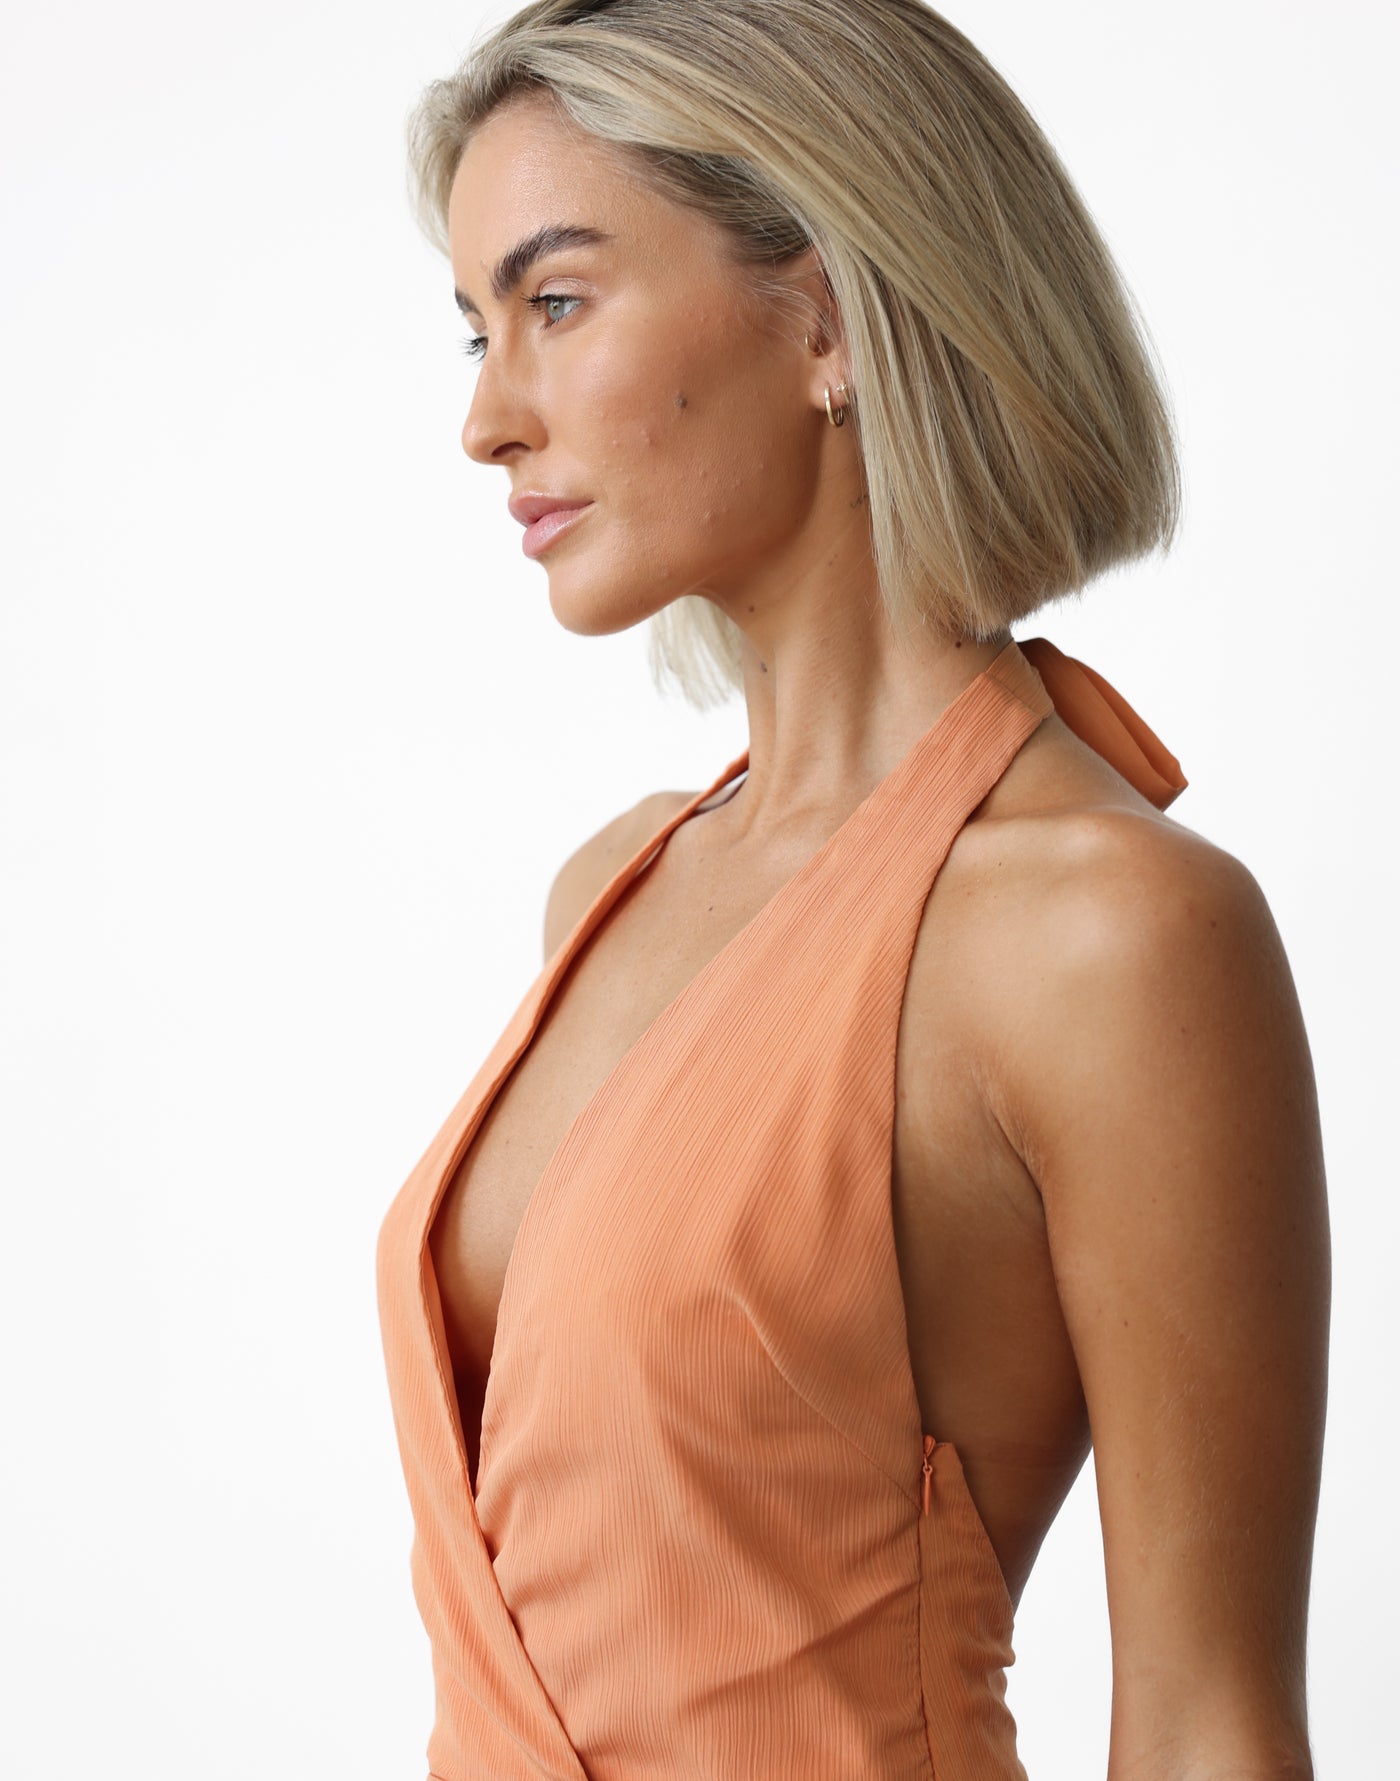 Raquelle Mini Dress (Apricot) | CHARCOAL Exclusive - Textured Sheer Overlay V-neckline A-line Mini Dress - Women's Dress - Charcoal Clothing